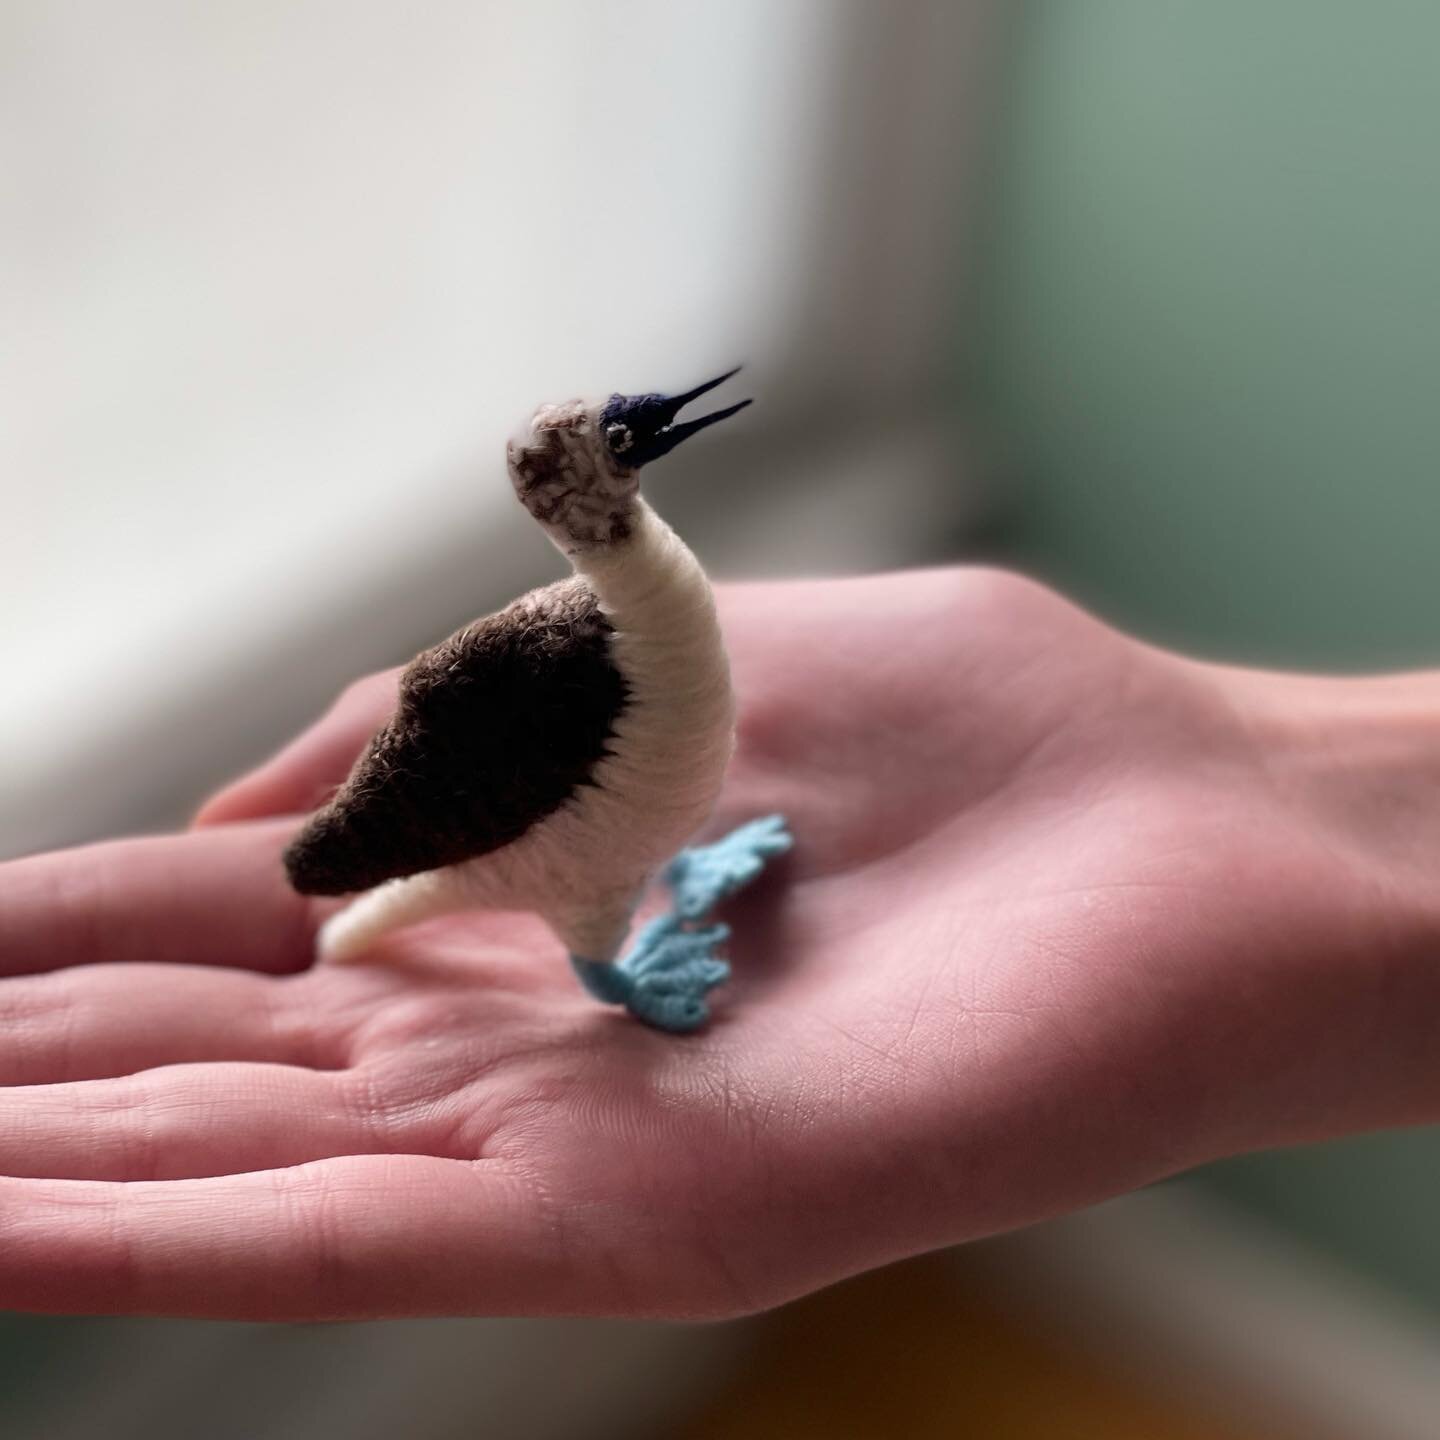 We traded a pair of socks for this awesome blue-footed booby by Japanese wool artist @kurokumaart 
Check out her art. 

#conservation #bluefootedbooby #wool #woolart #socks #internationaltrade